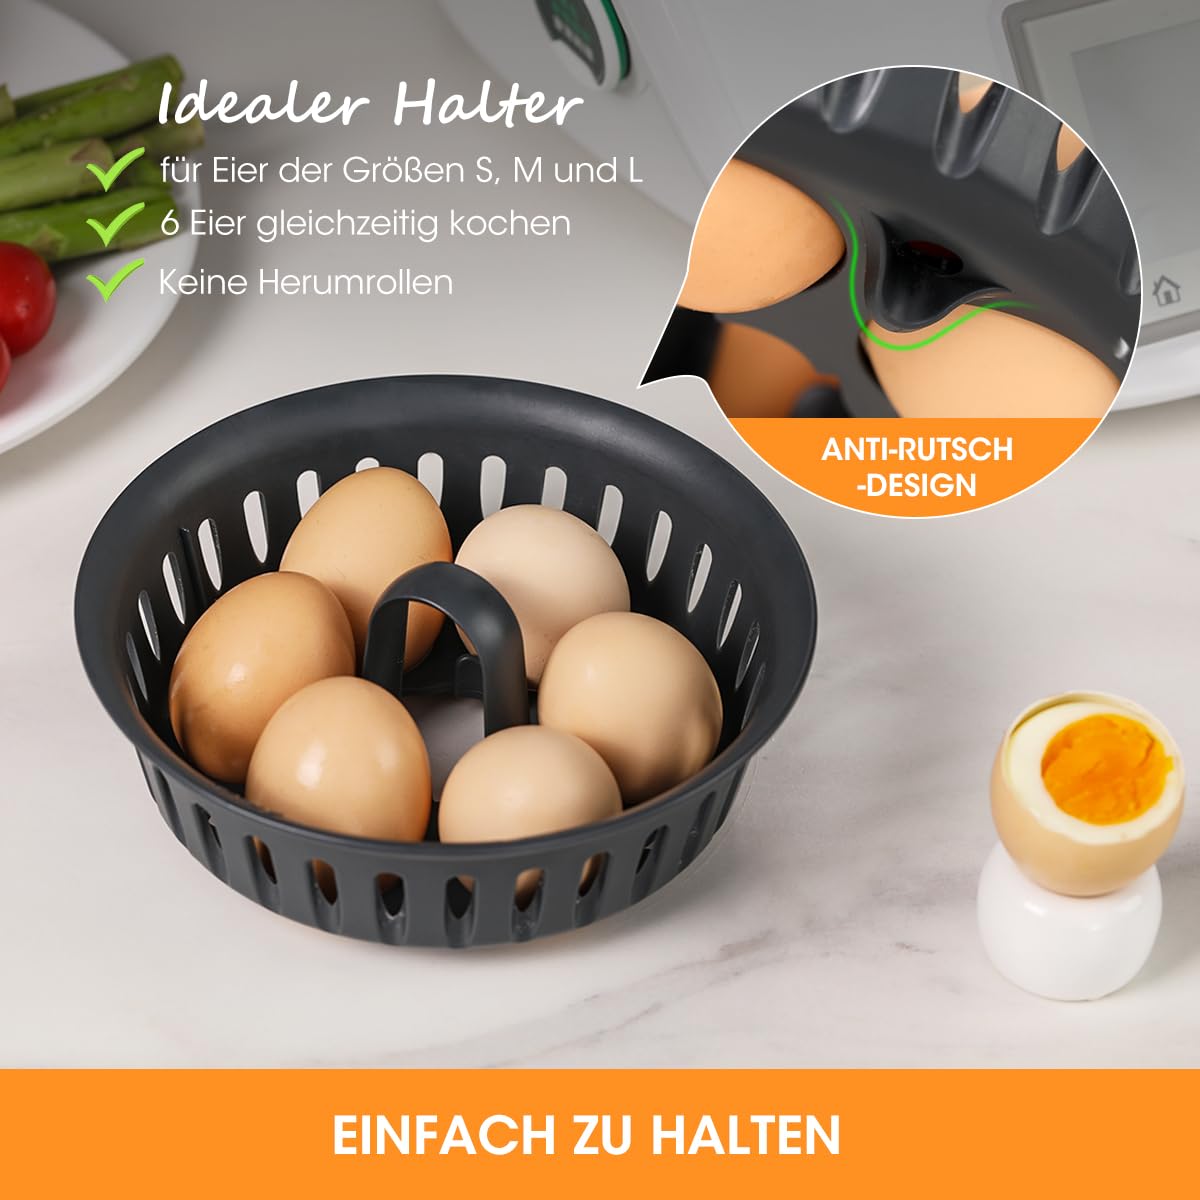 This 2-in-1 egg cooker combines the functions of poached eggs and boiled eggs.